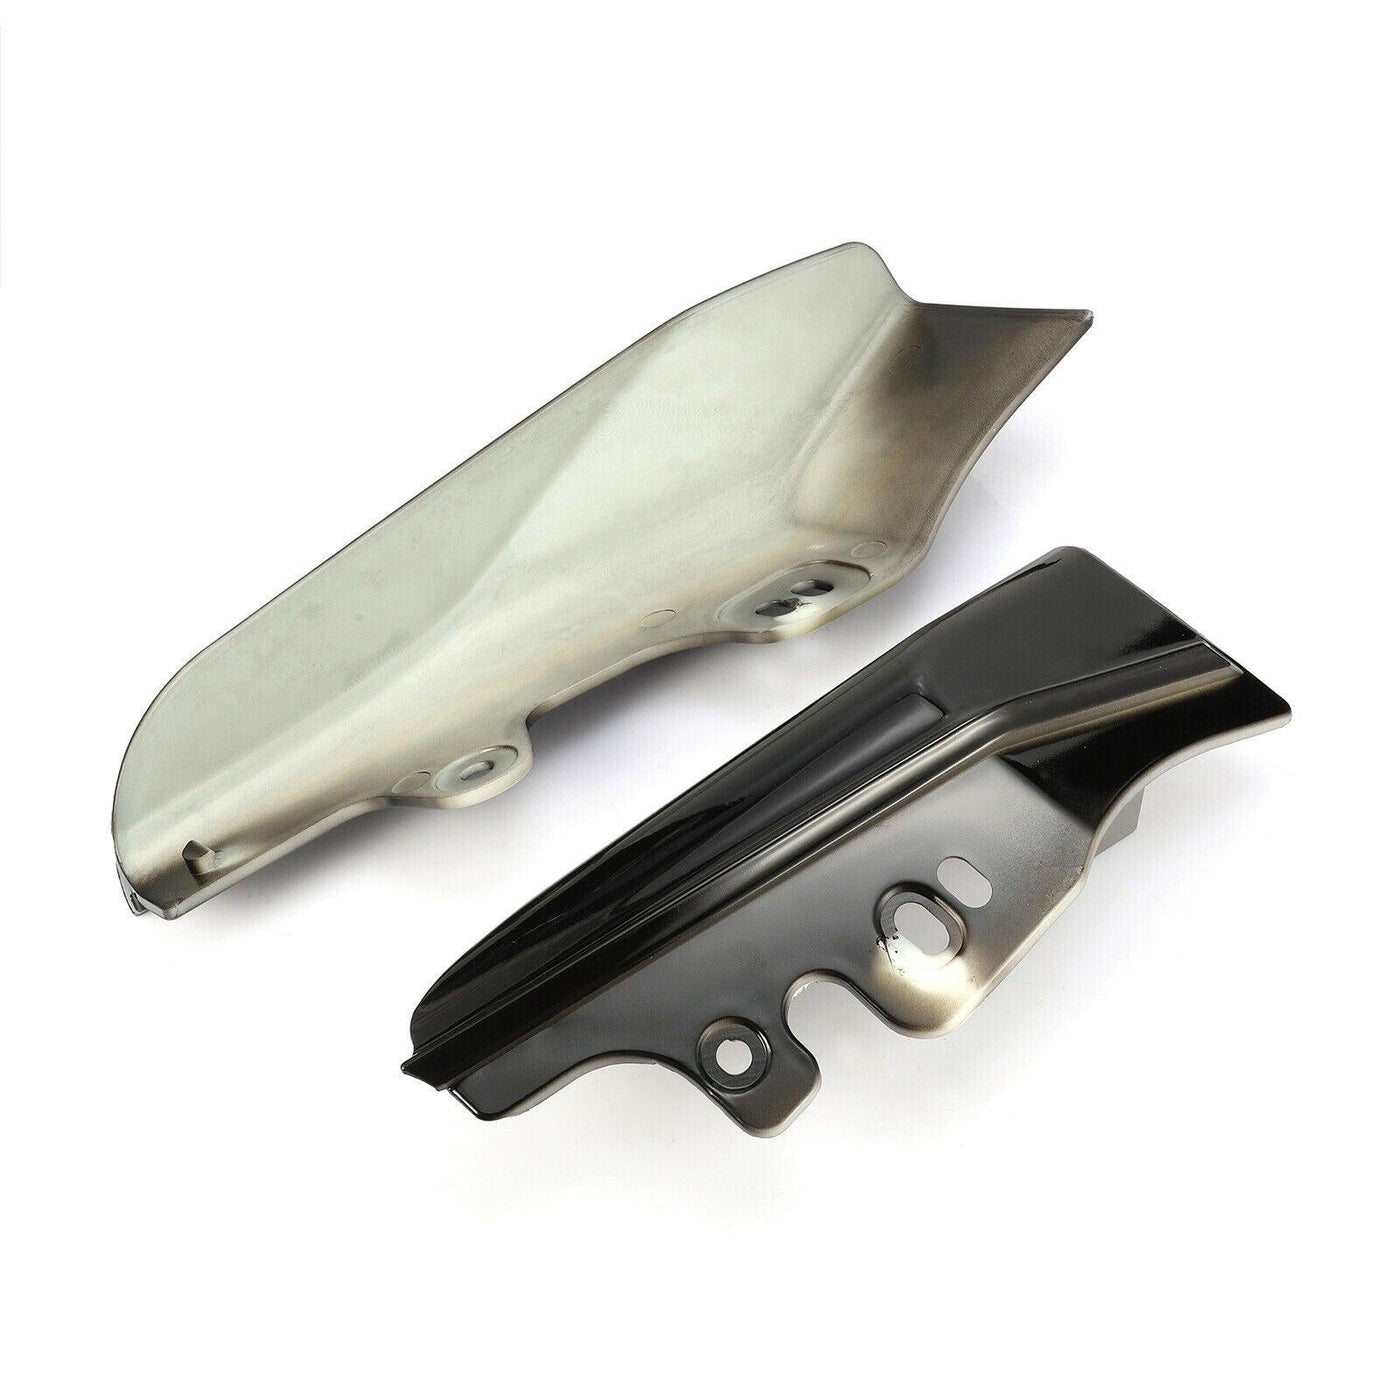 Mid-Frame Air Deflector Fit For Harley Touring Electra Road Glide King 2001-2008 - Moto Life Products